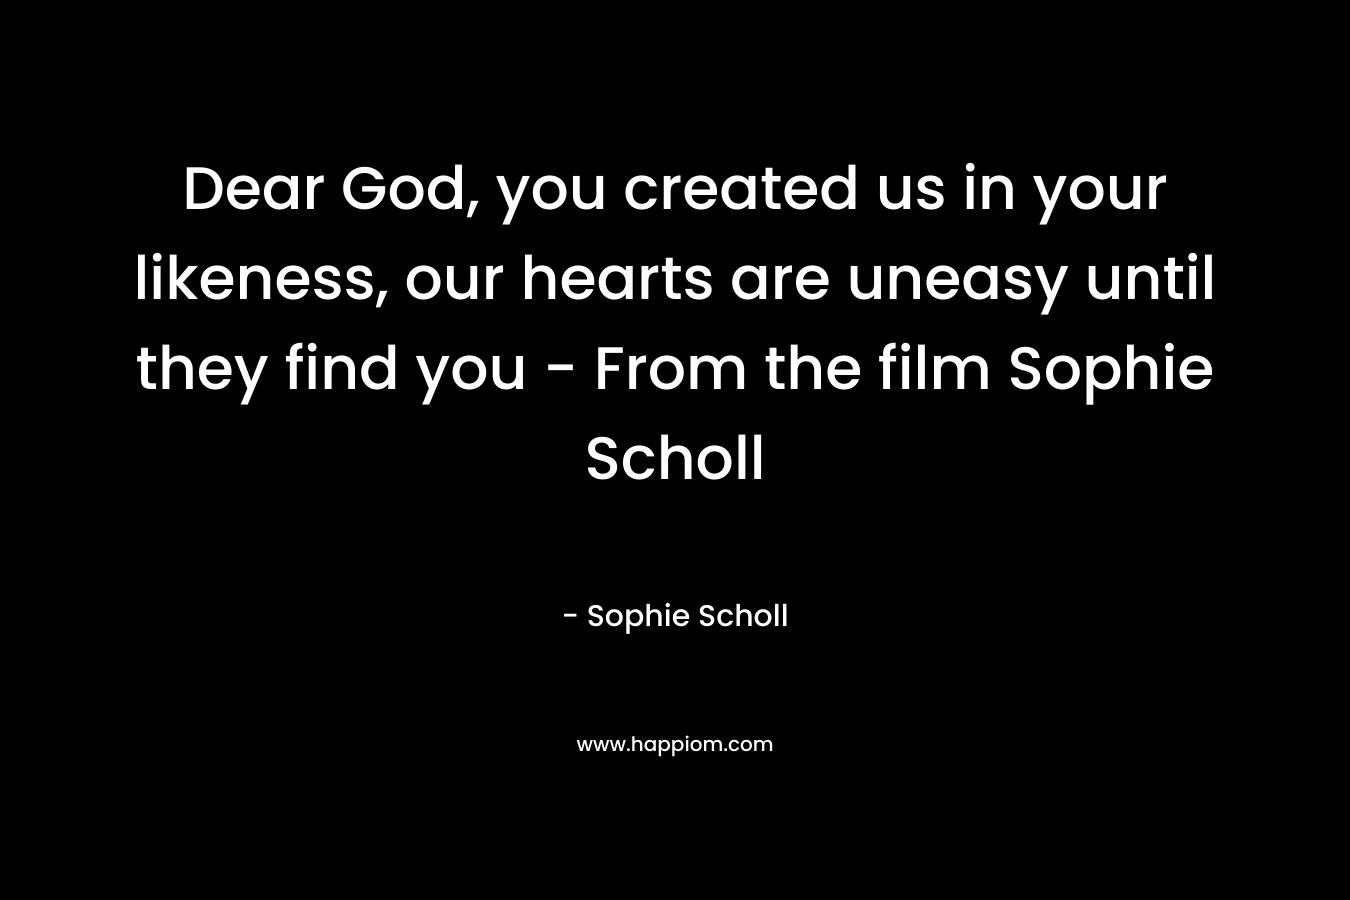 Dear God, you created us in your likeness, our hearts are uneasy until they find you - From the film Sophie Scholl